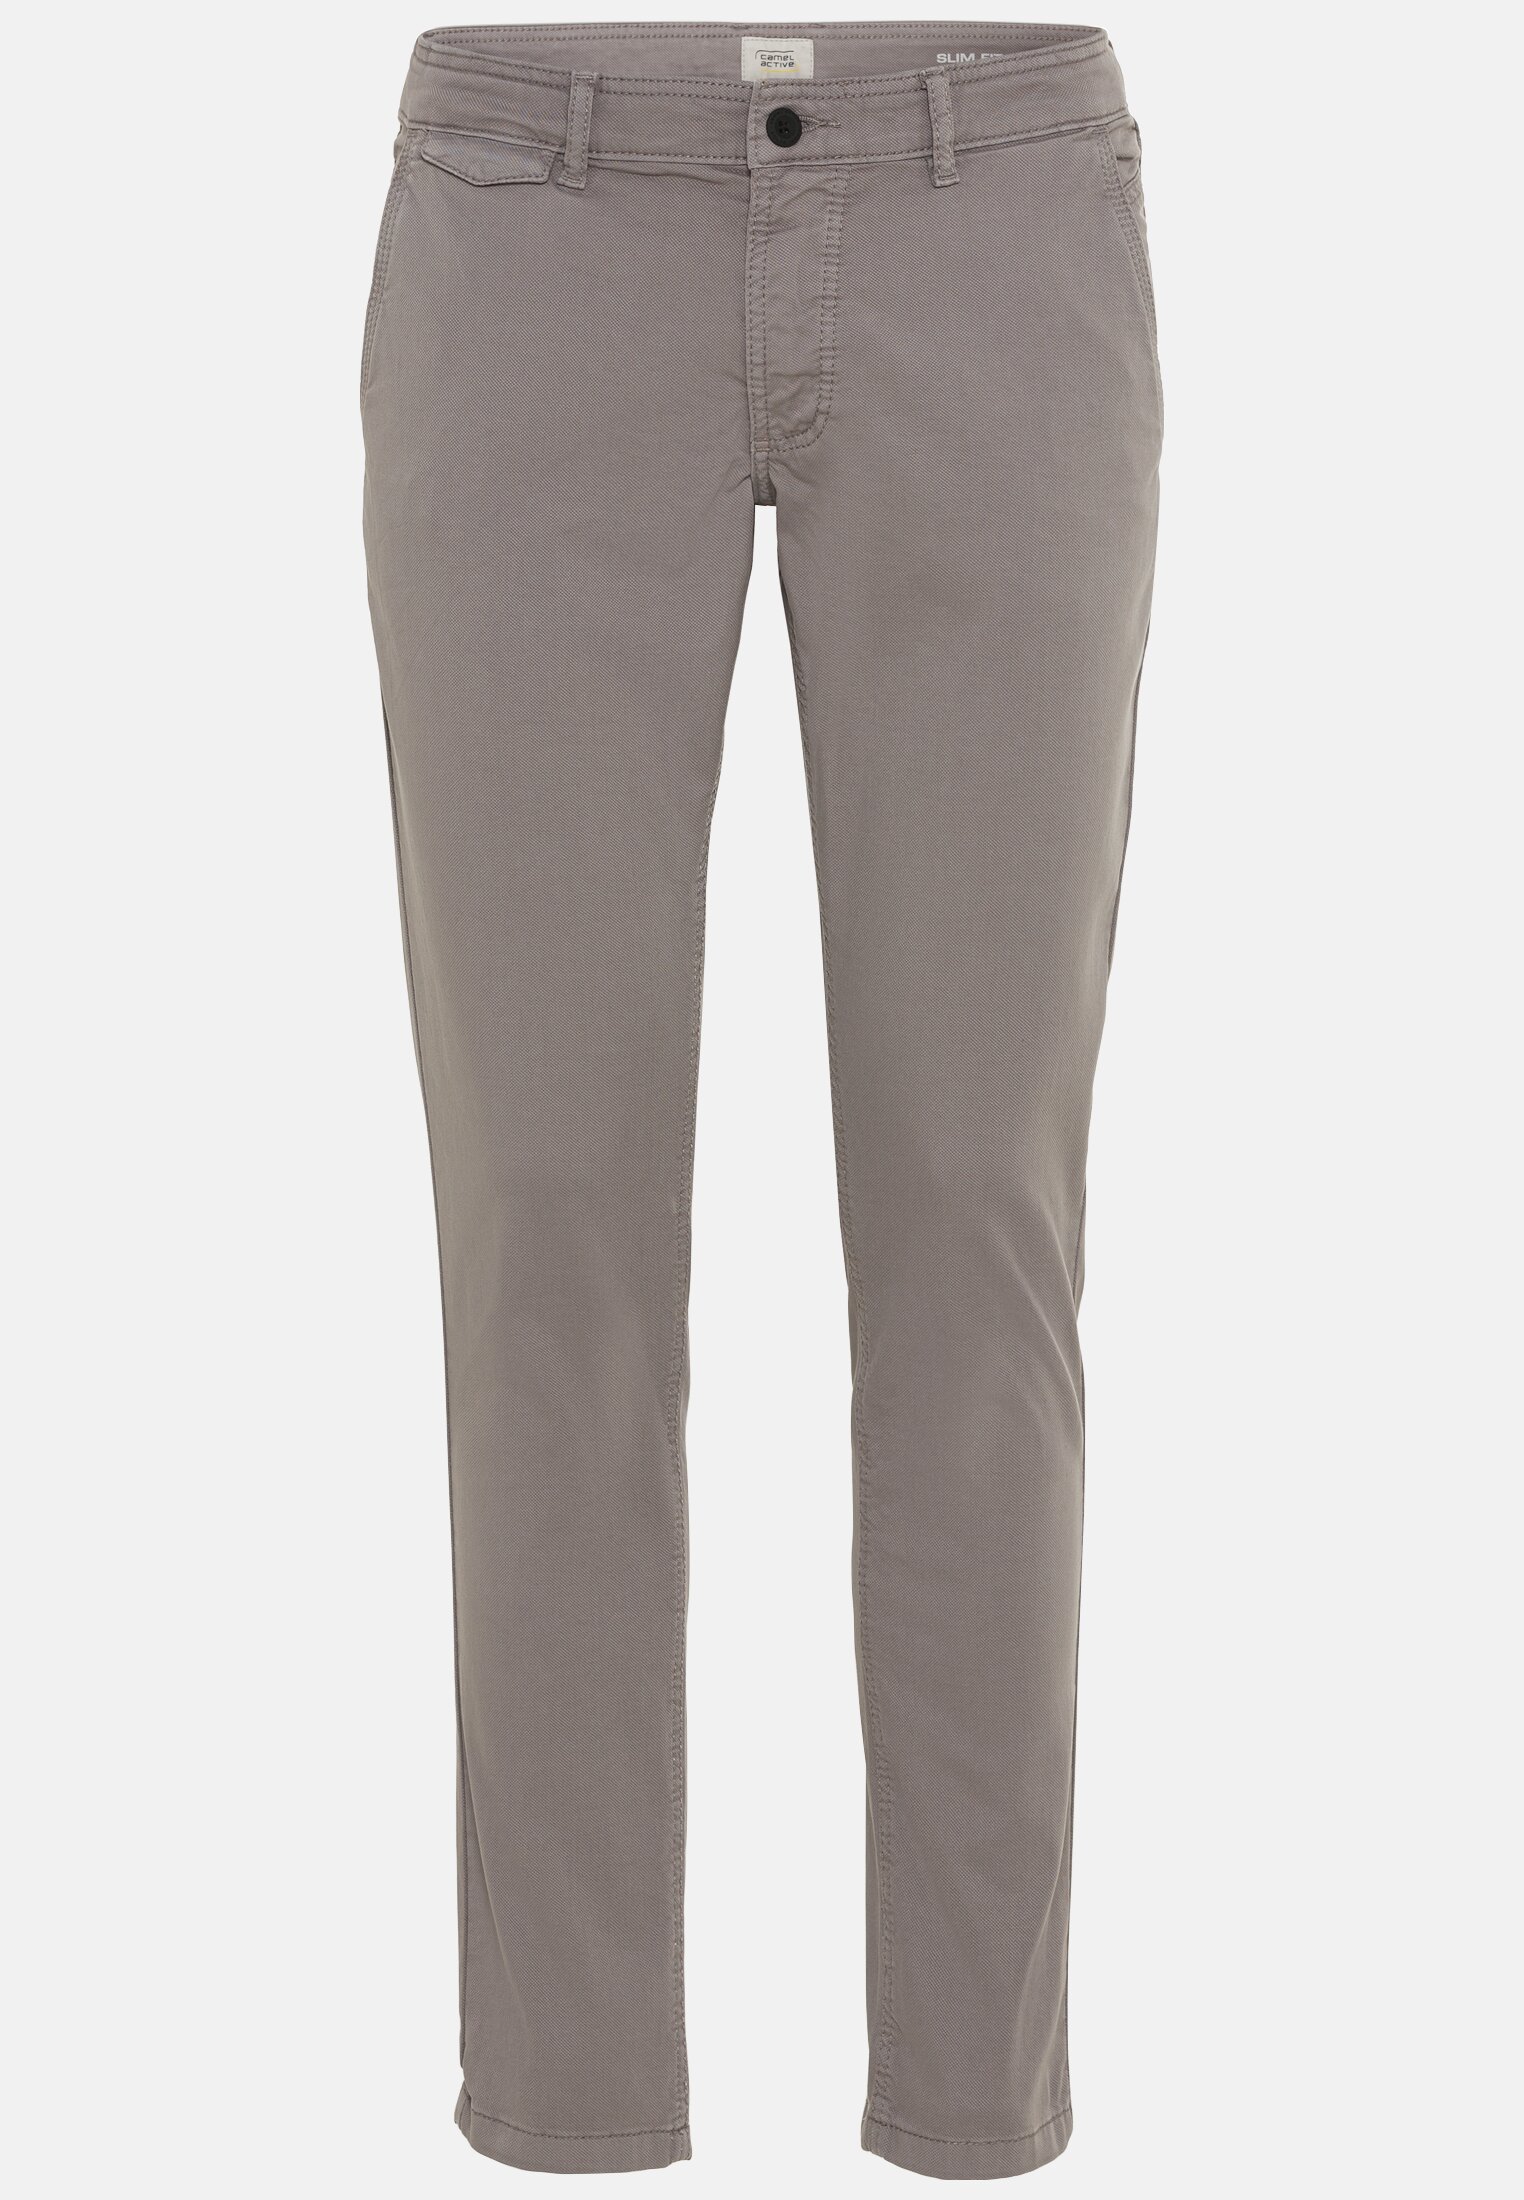 Camel Active Slim fit cotton chino